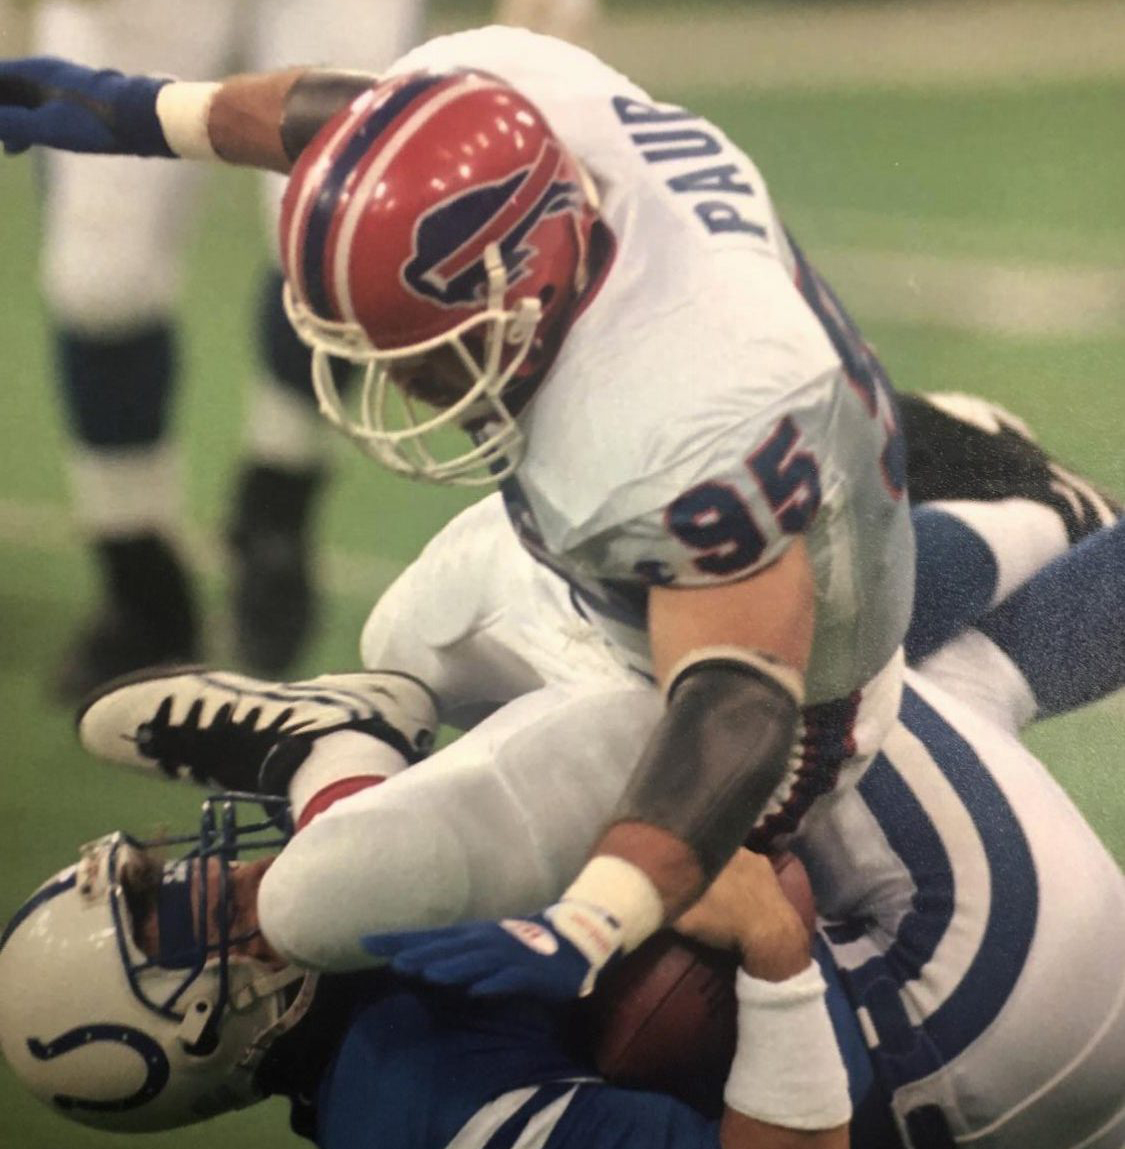 Bryce Paup tackles an opponent in the NFL